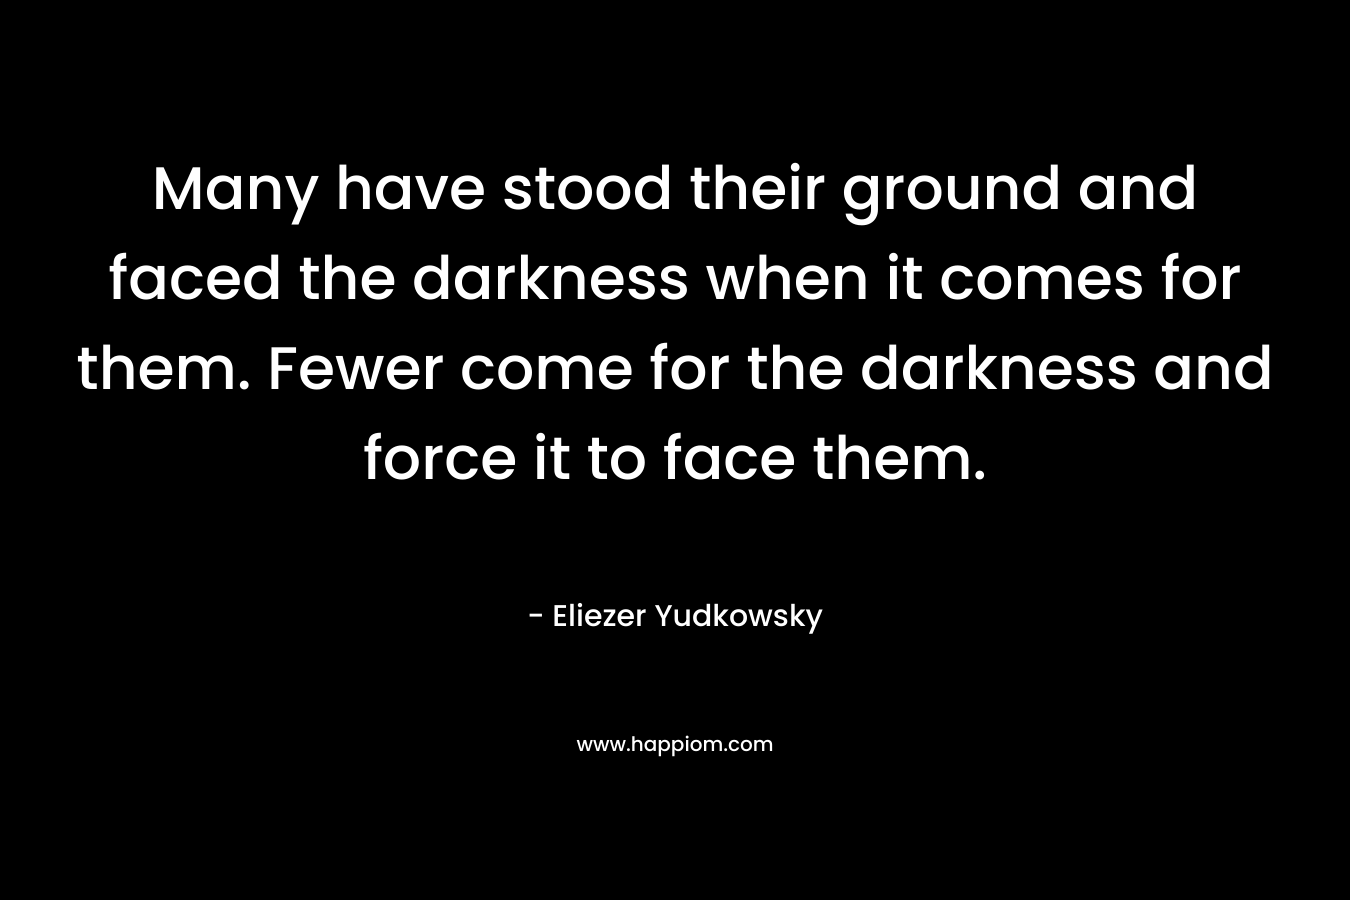 Many have stood their ground and faced the darkness when it comes for them. Fewer come for the darkness and force it to face them.